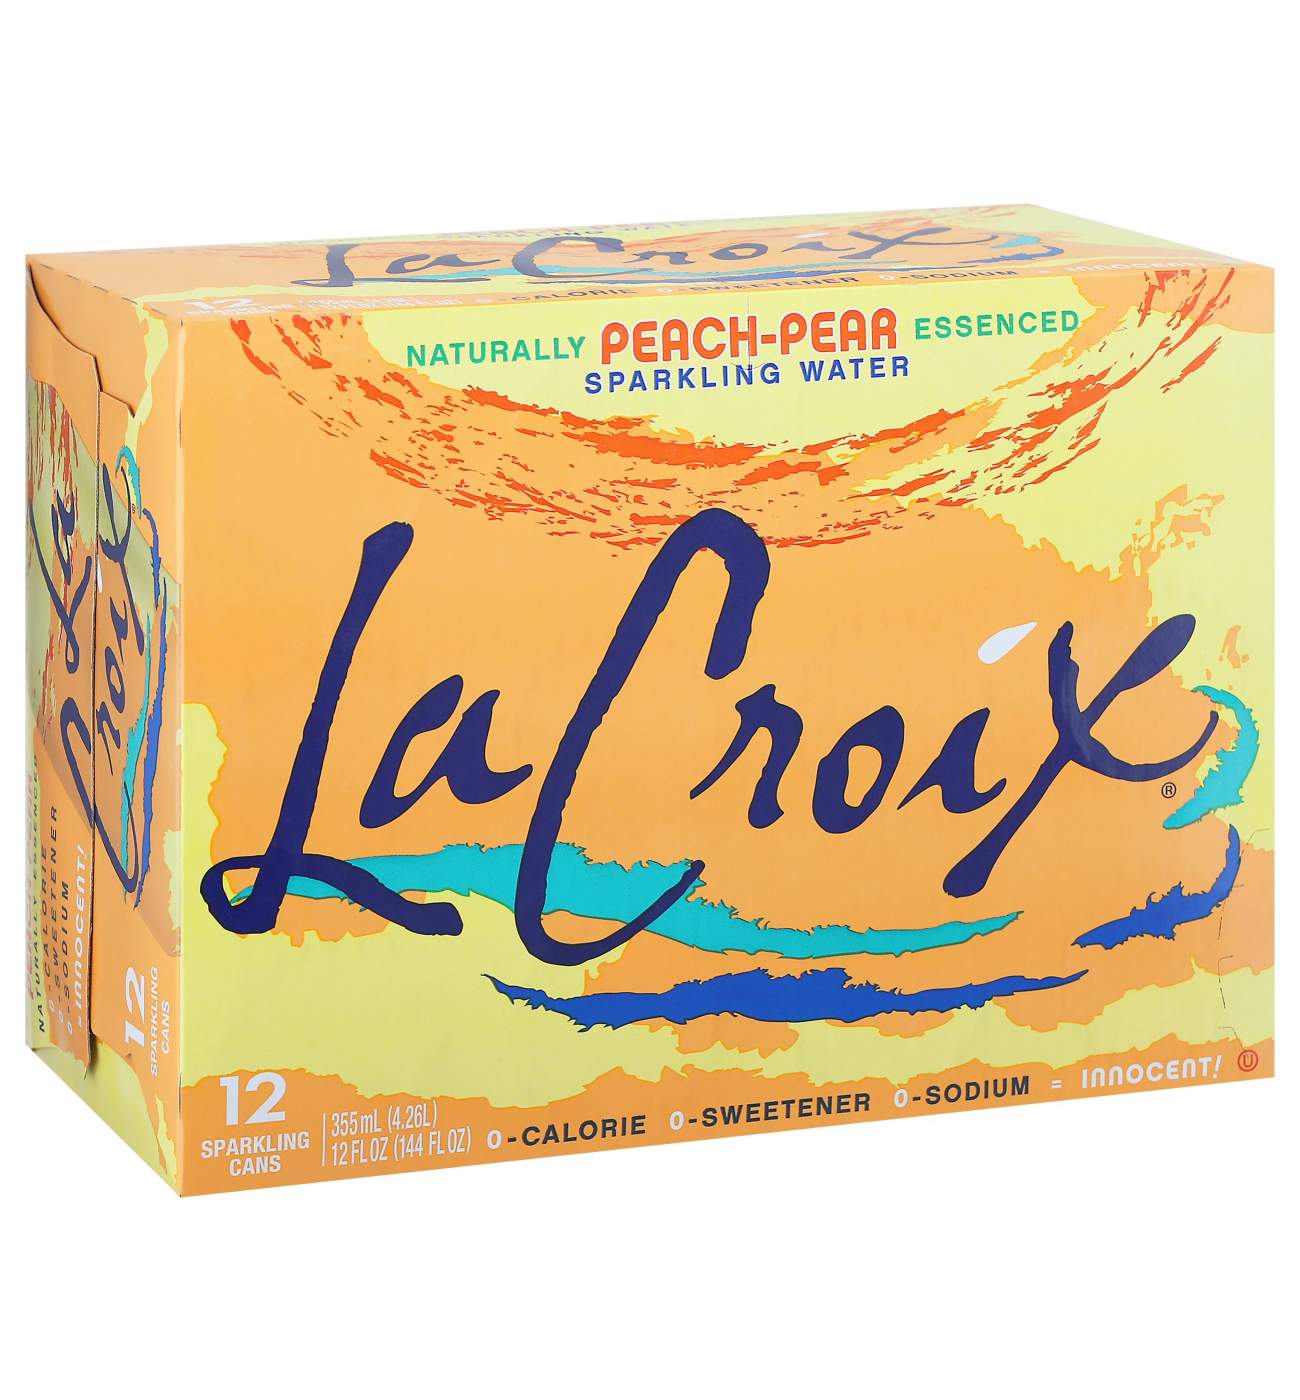 LaCroix Peach Pear Sparkling Water 12 oz Cans; image 1 of 2